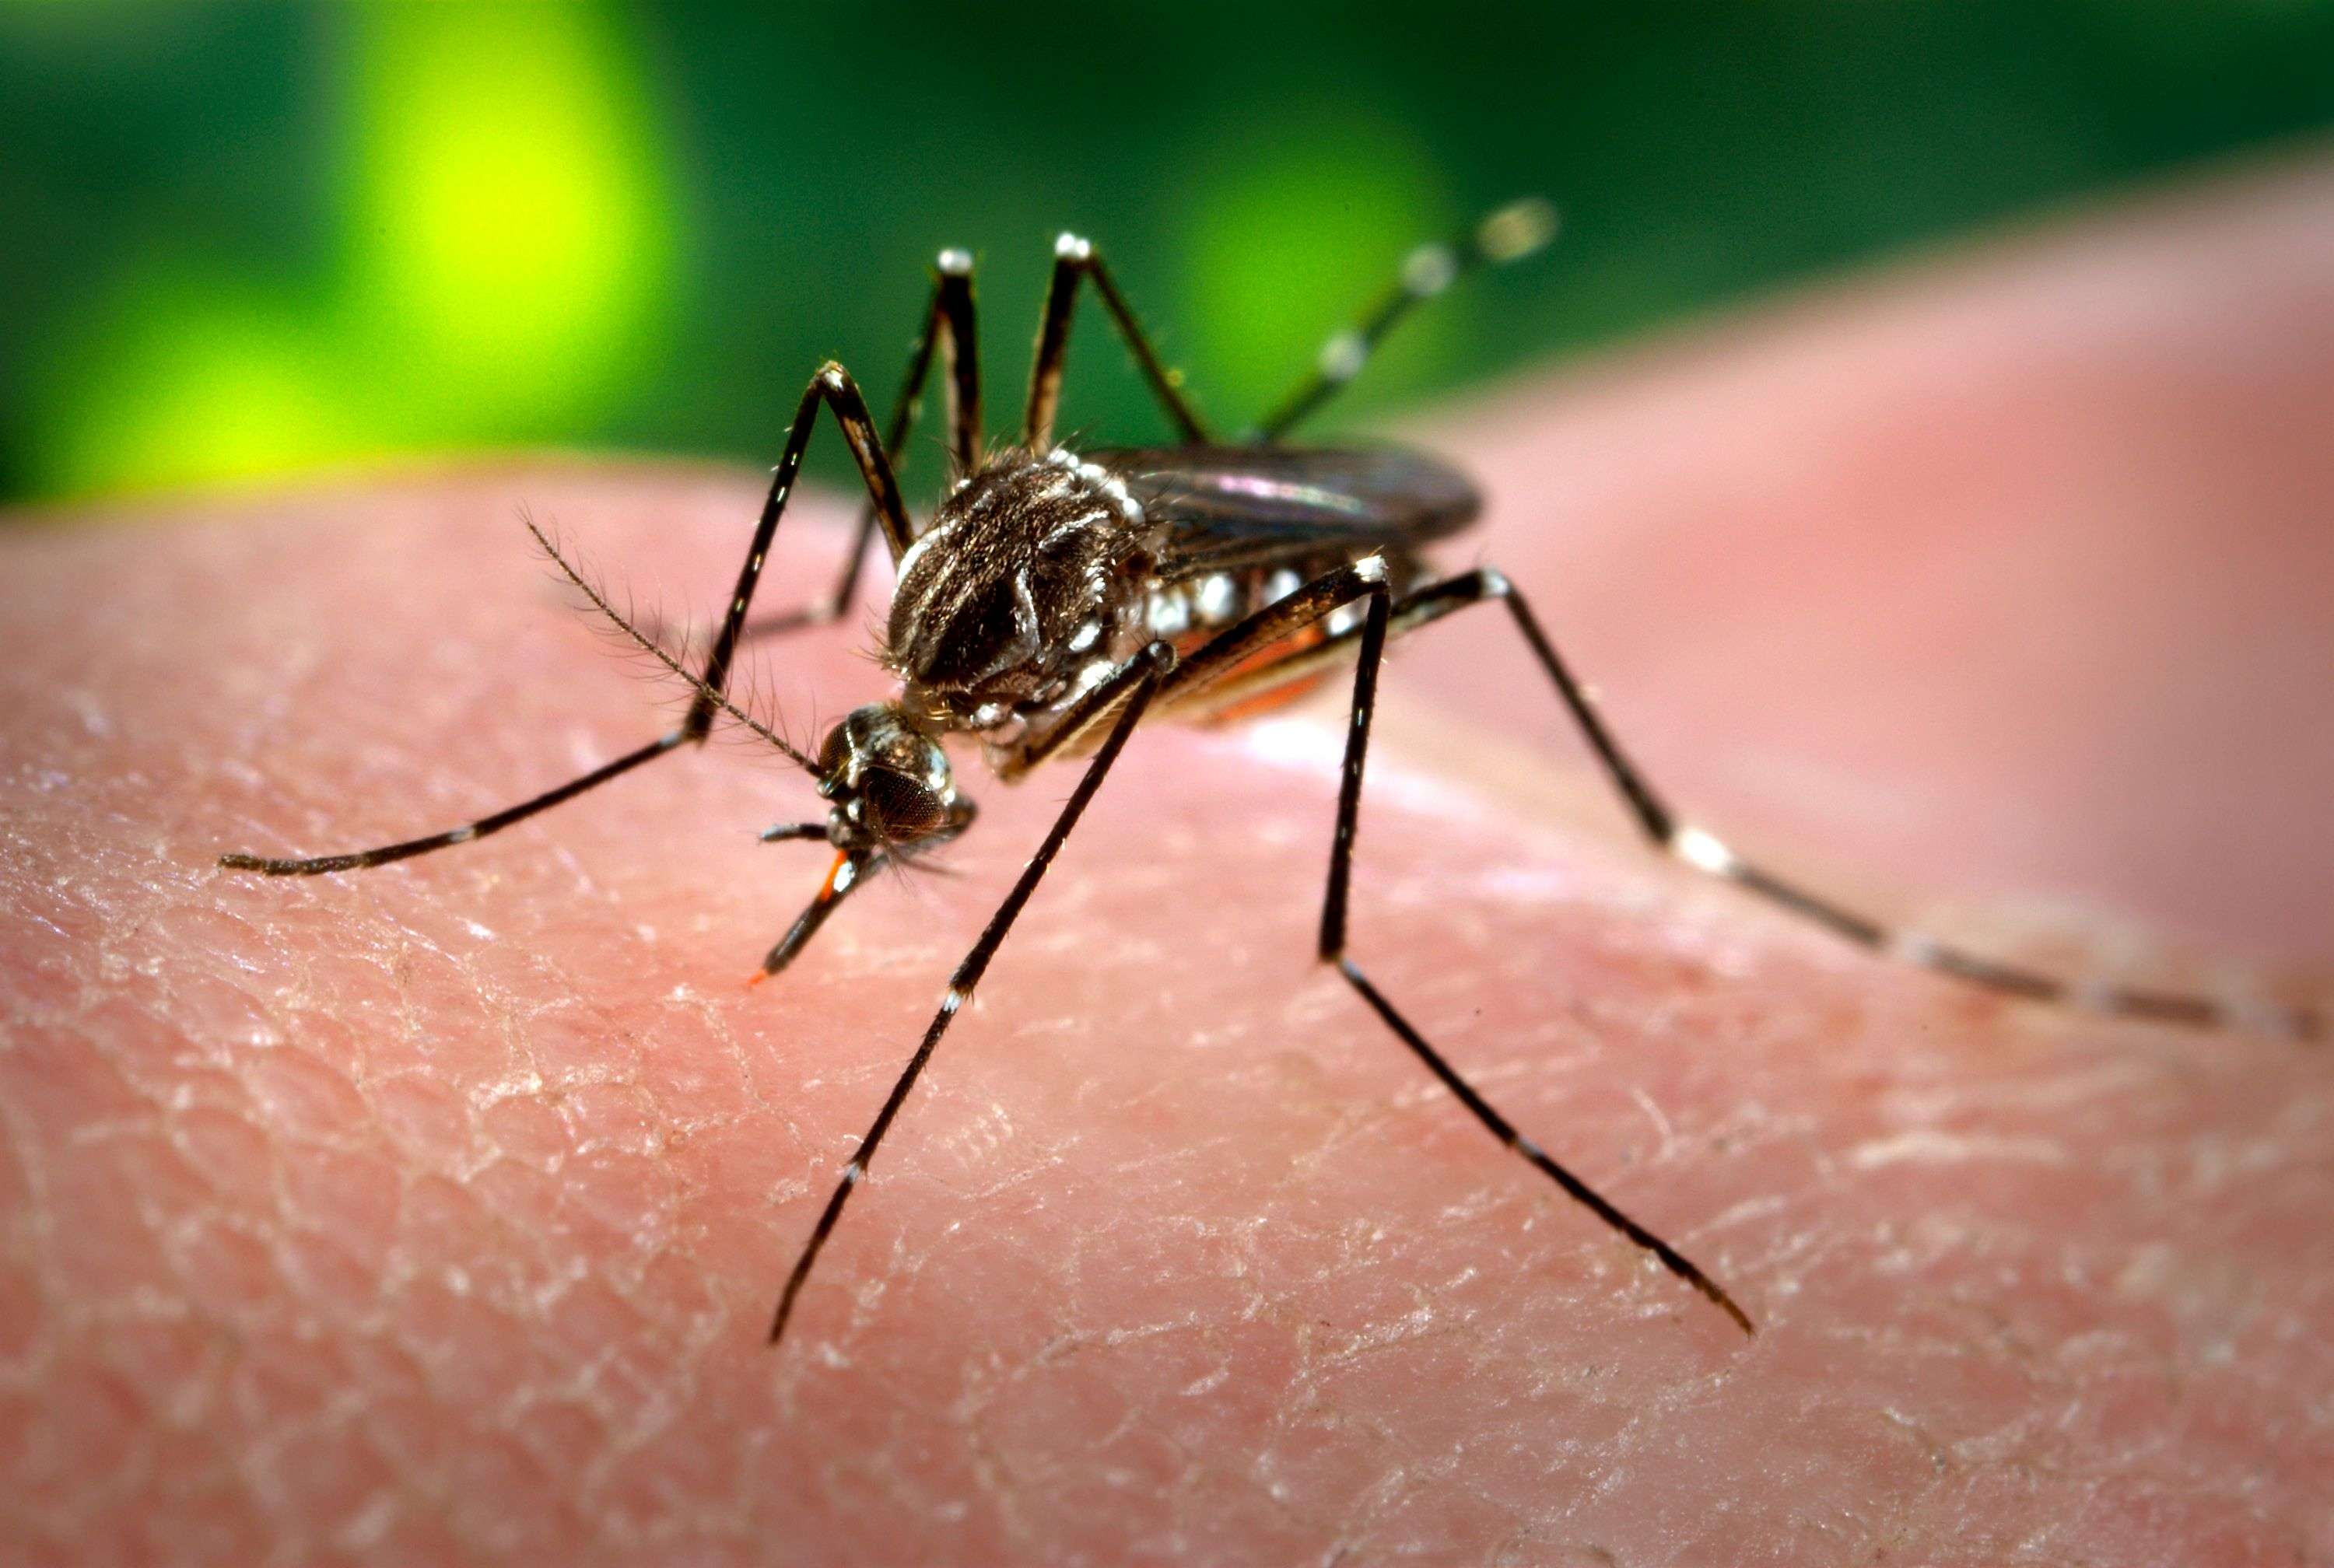 Government increases dengue tests by 2.5 times more than last year